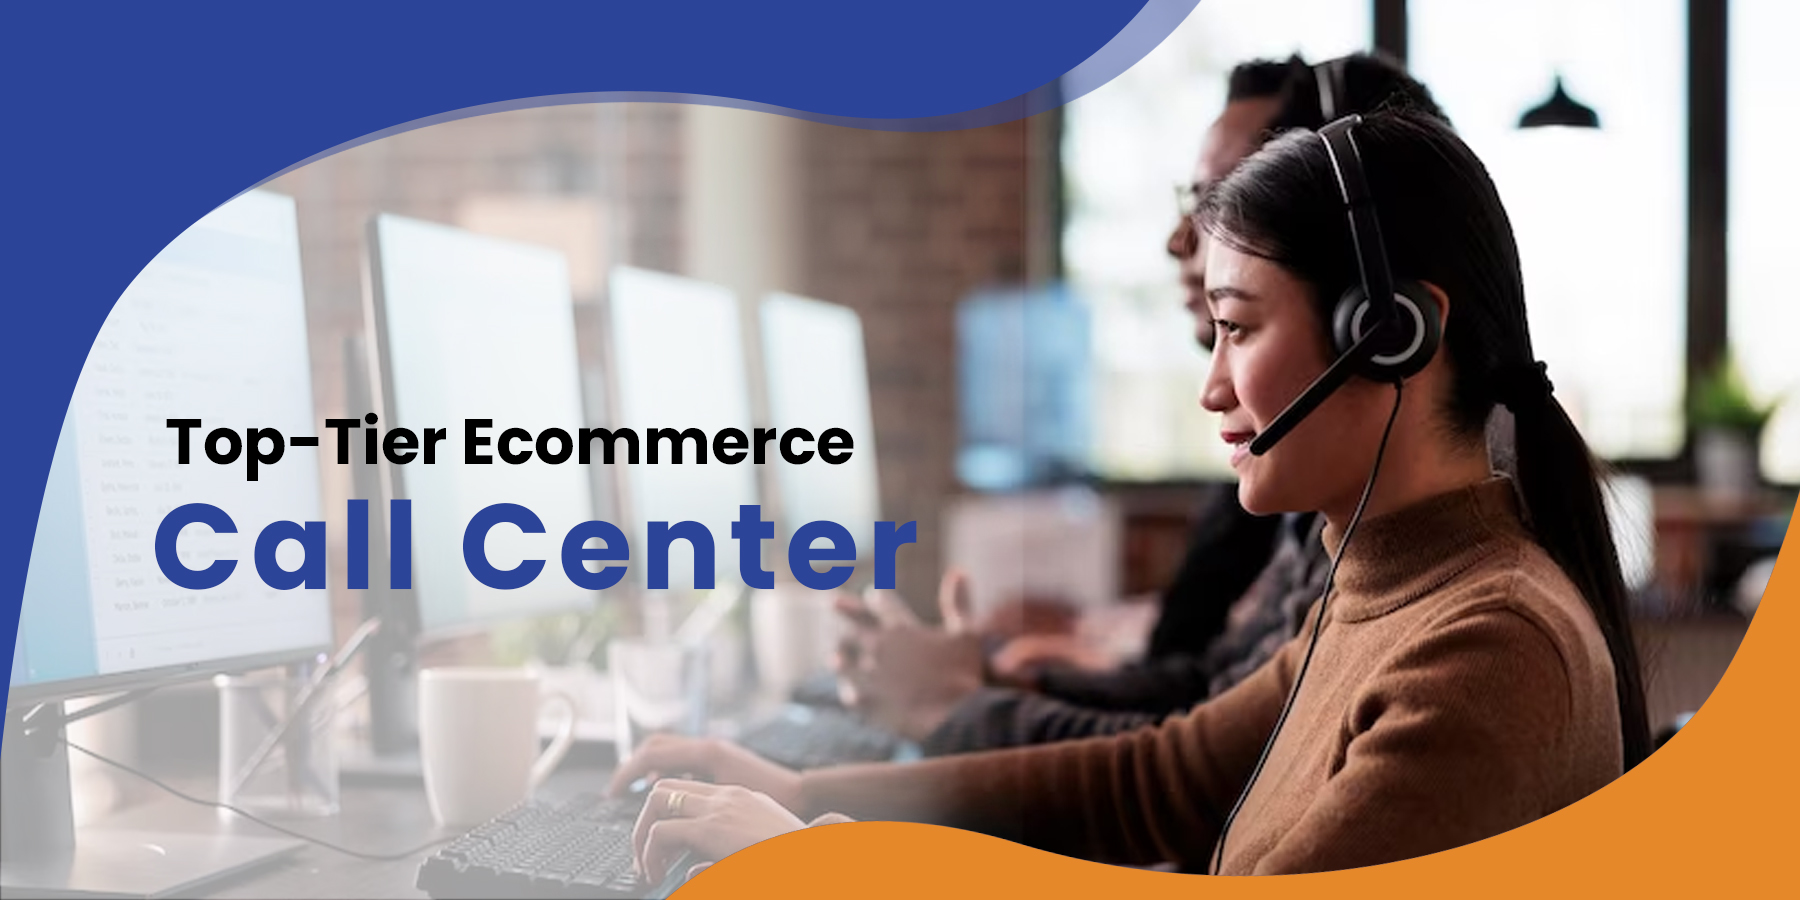 Top Tier Ecommerce Call Center